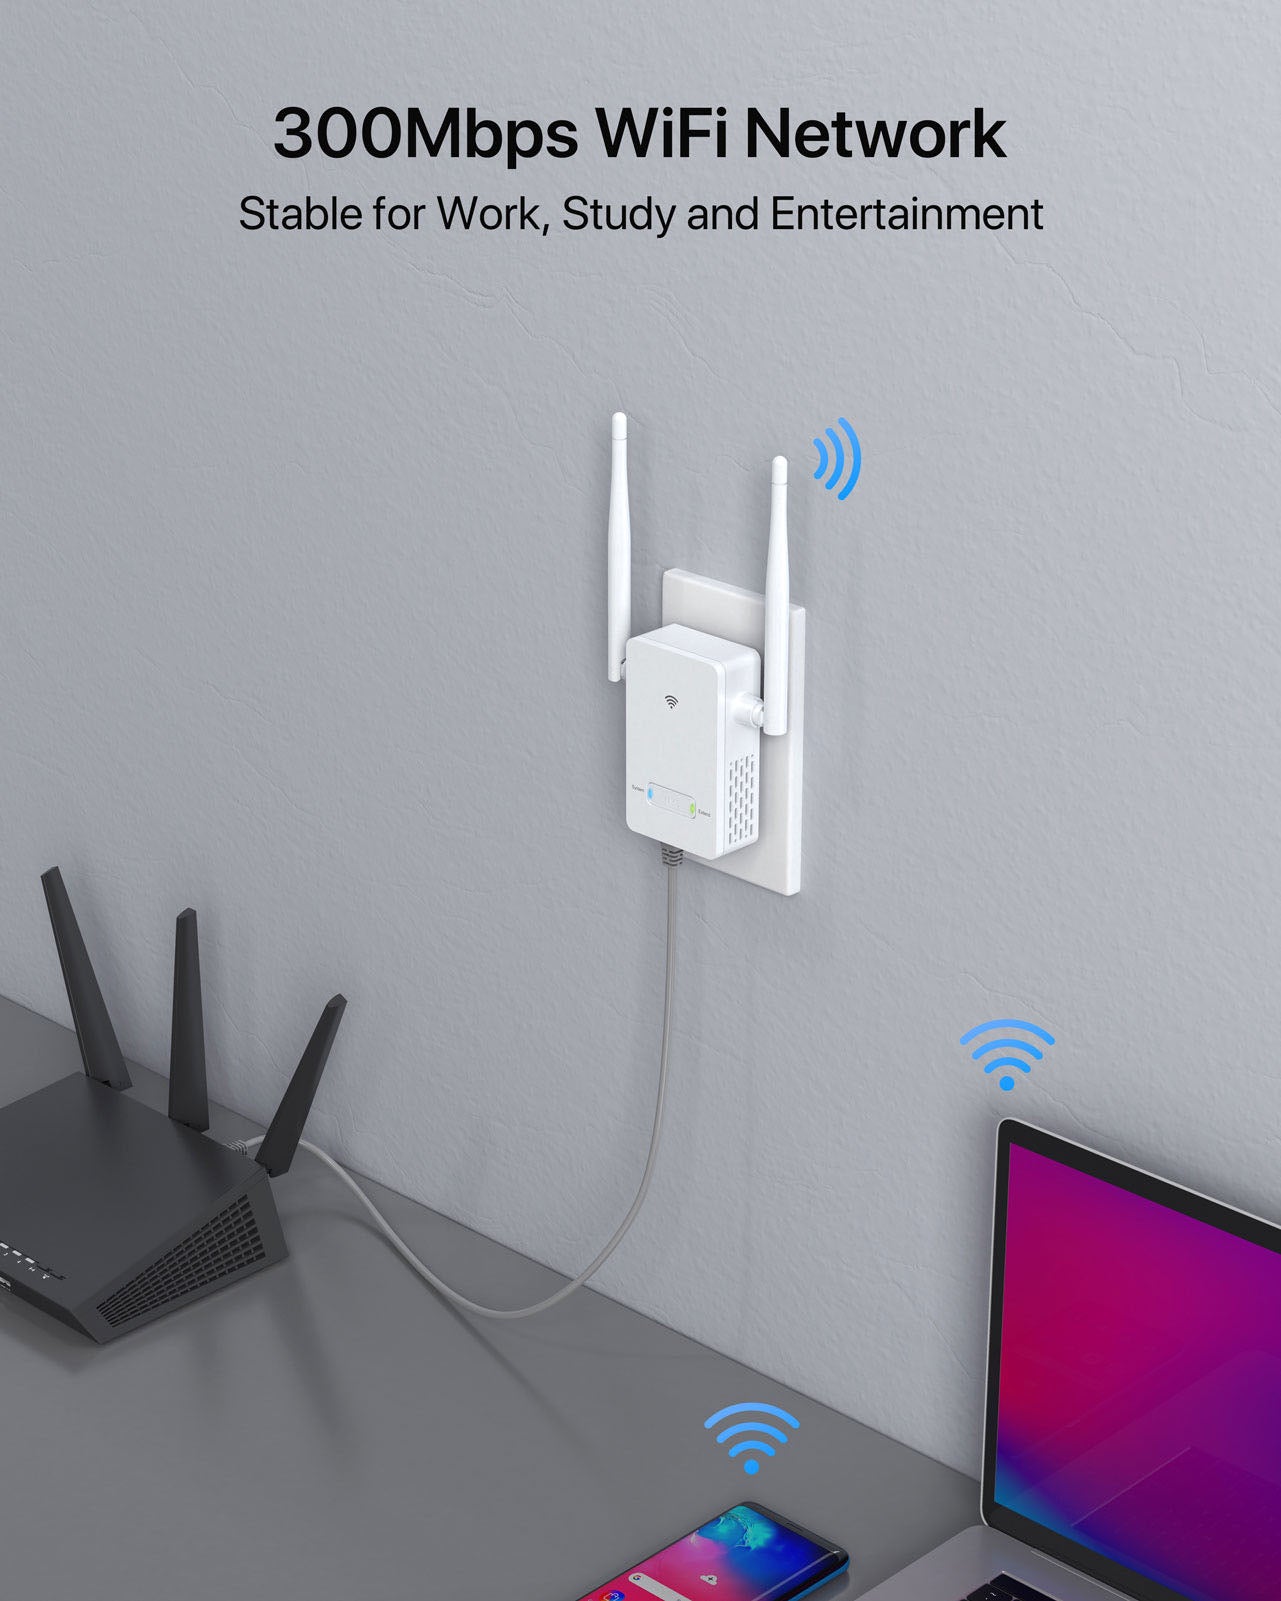 N300 Wireless Access Point Home WiFi Access Point AP Delivers 300Mbps 2.4GHz WiFi Network